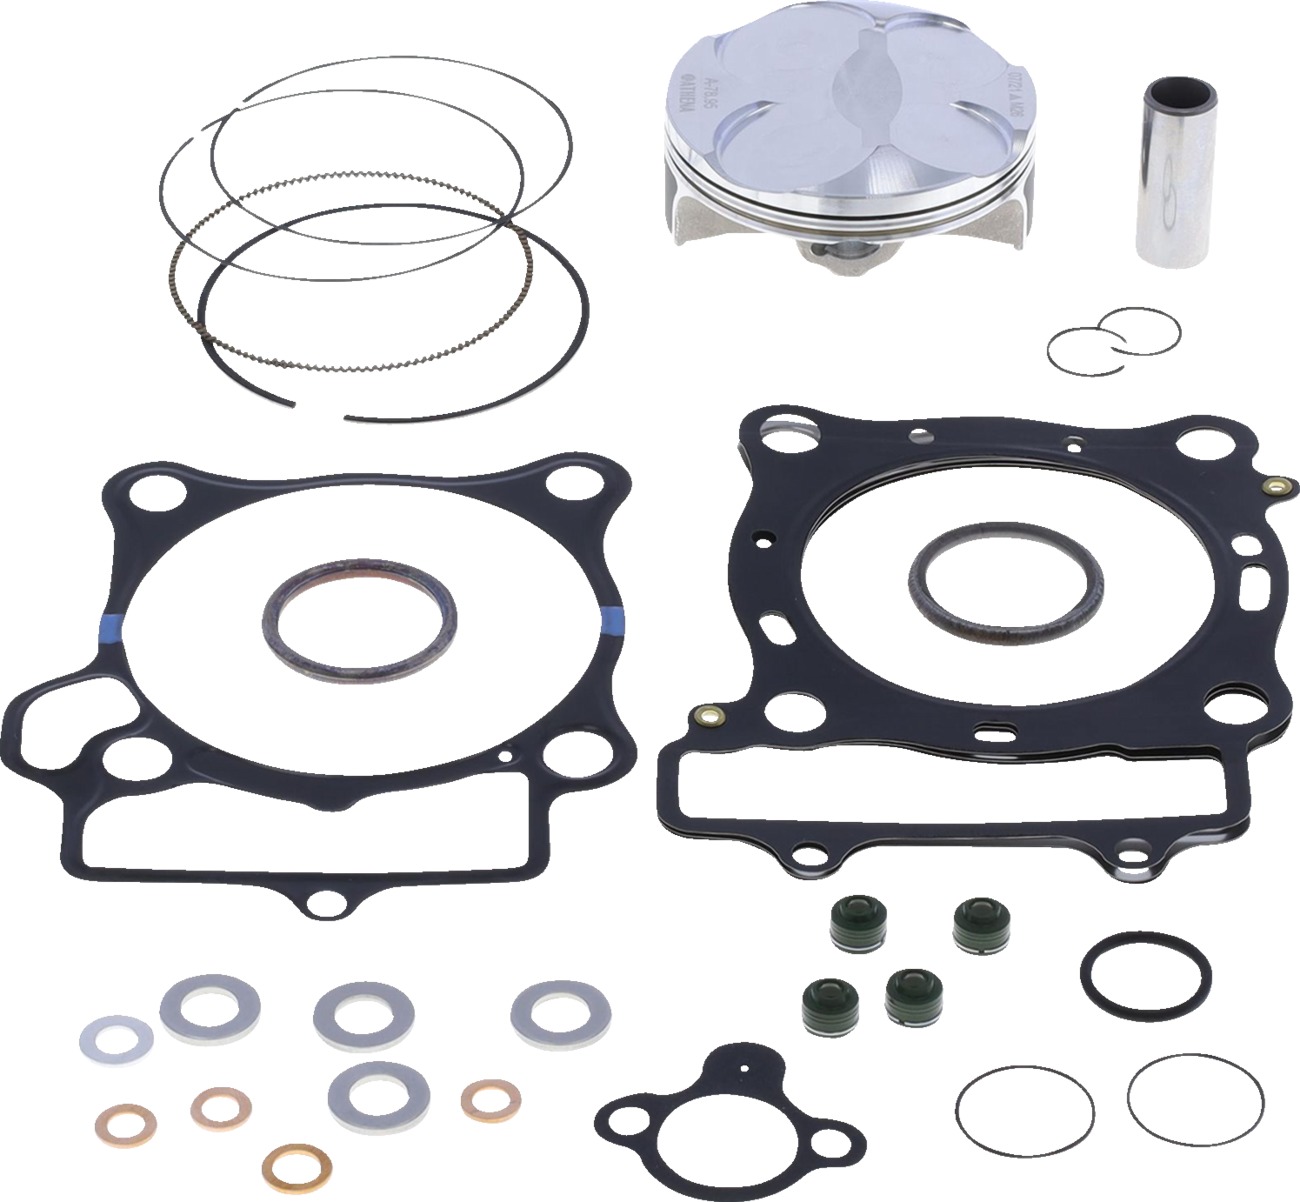 Piston & Top End Gasket Kit 'A' - For 20-21 Honda CRF250R - Click Image to Close